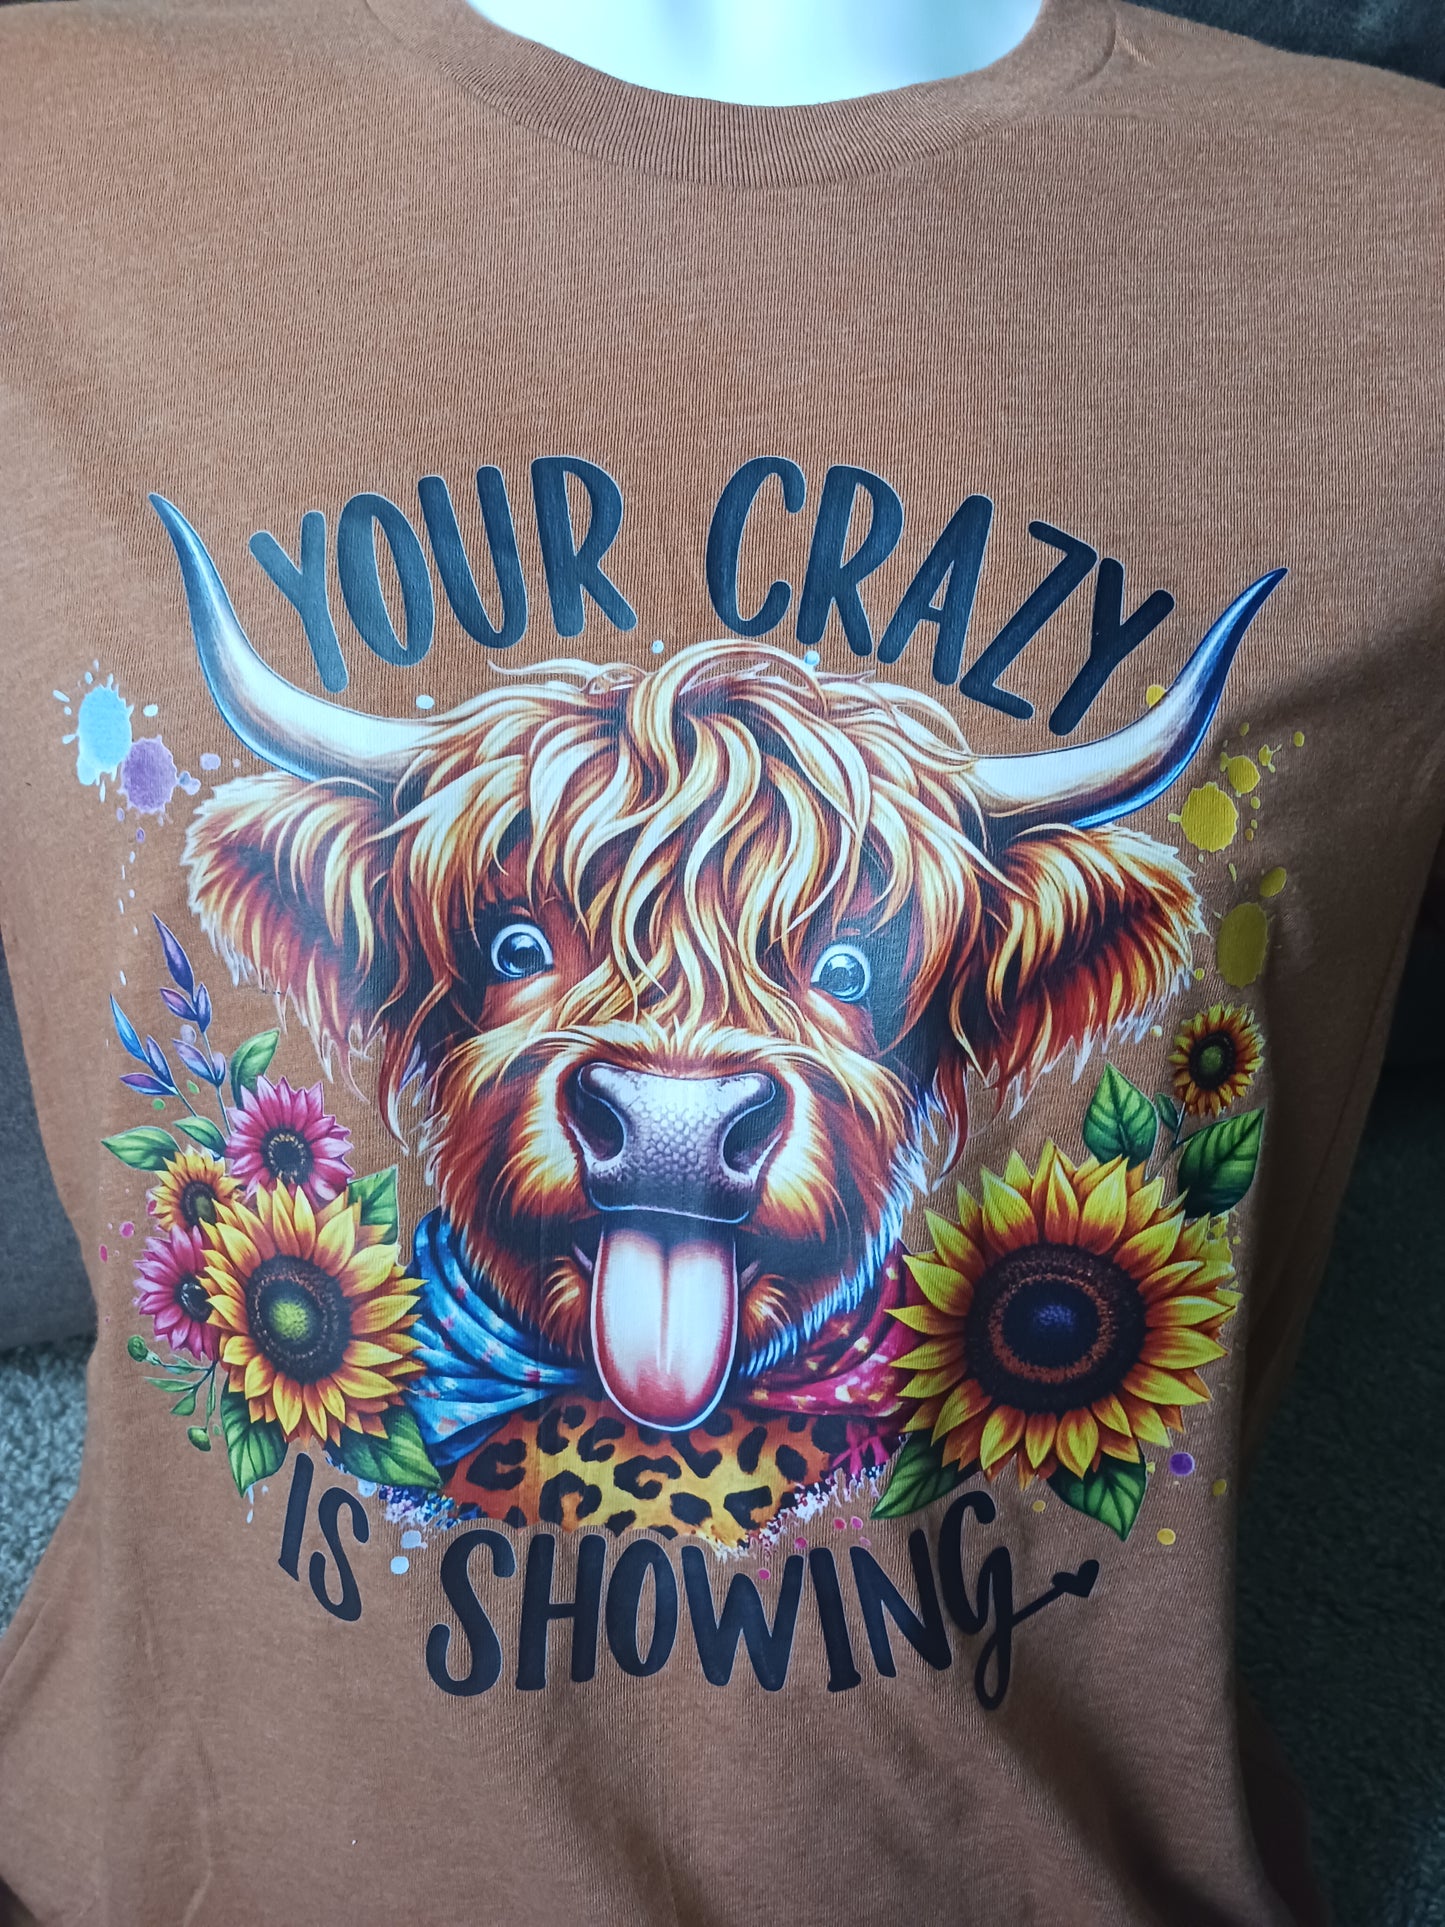 Your crazy is showing Tshirt